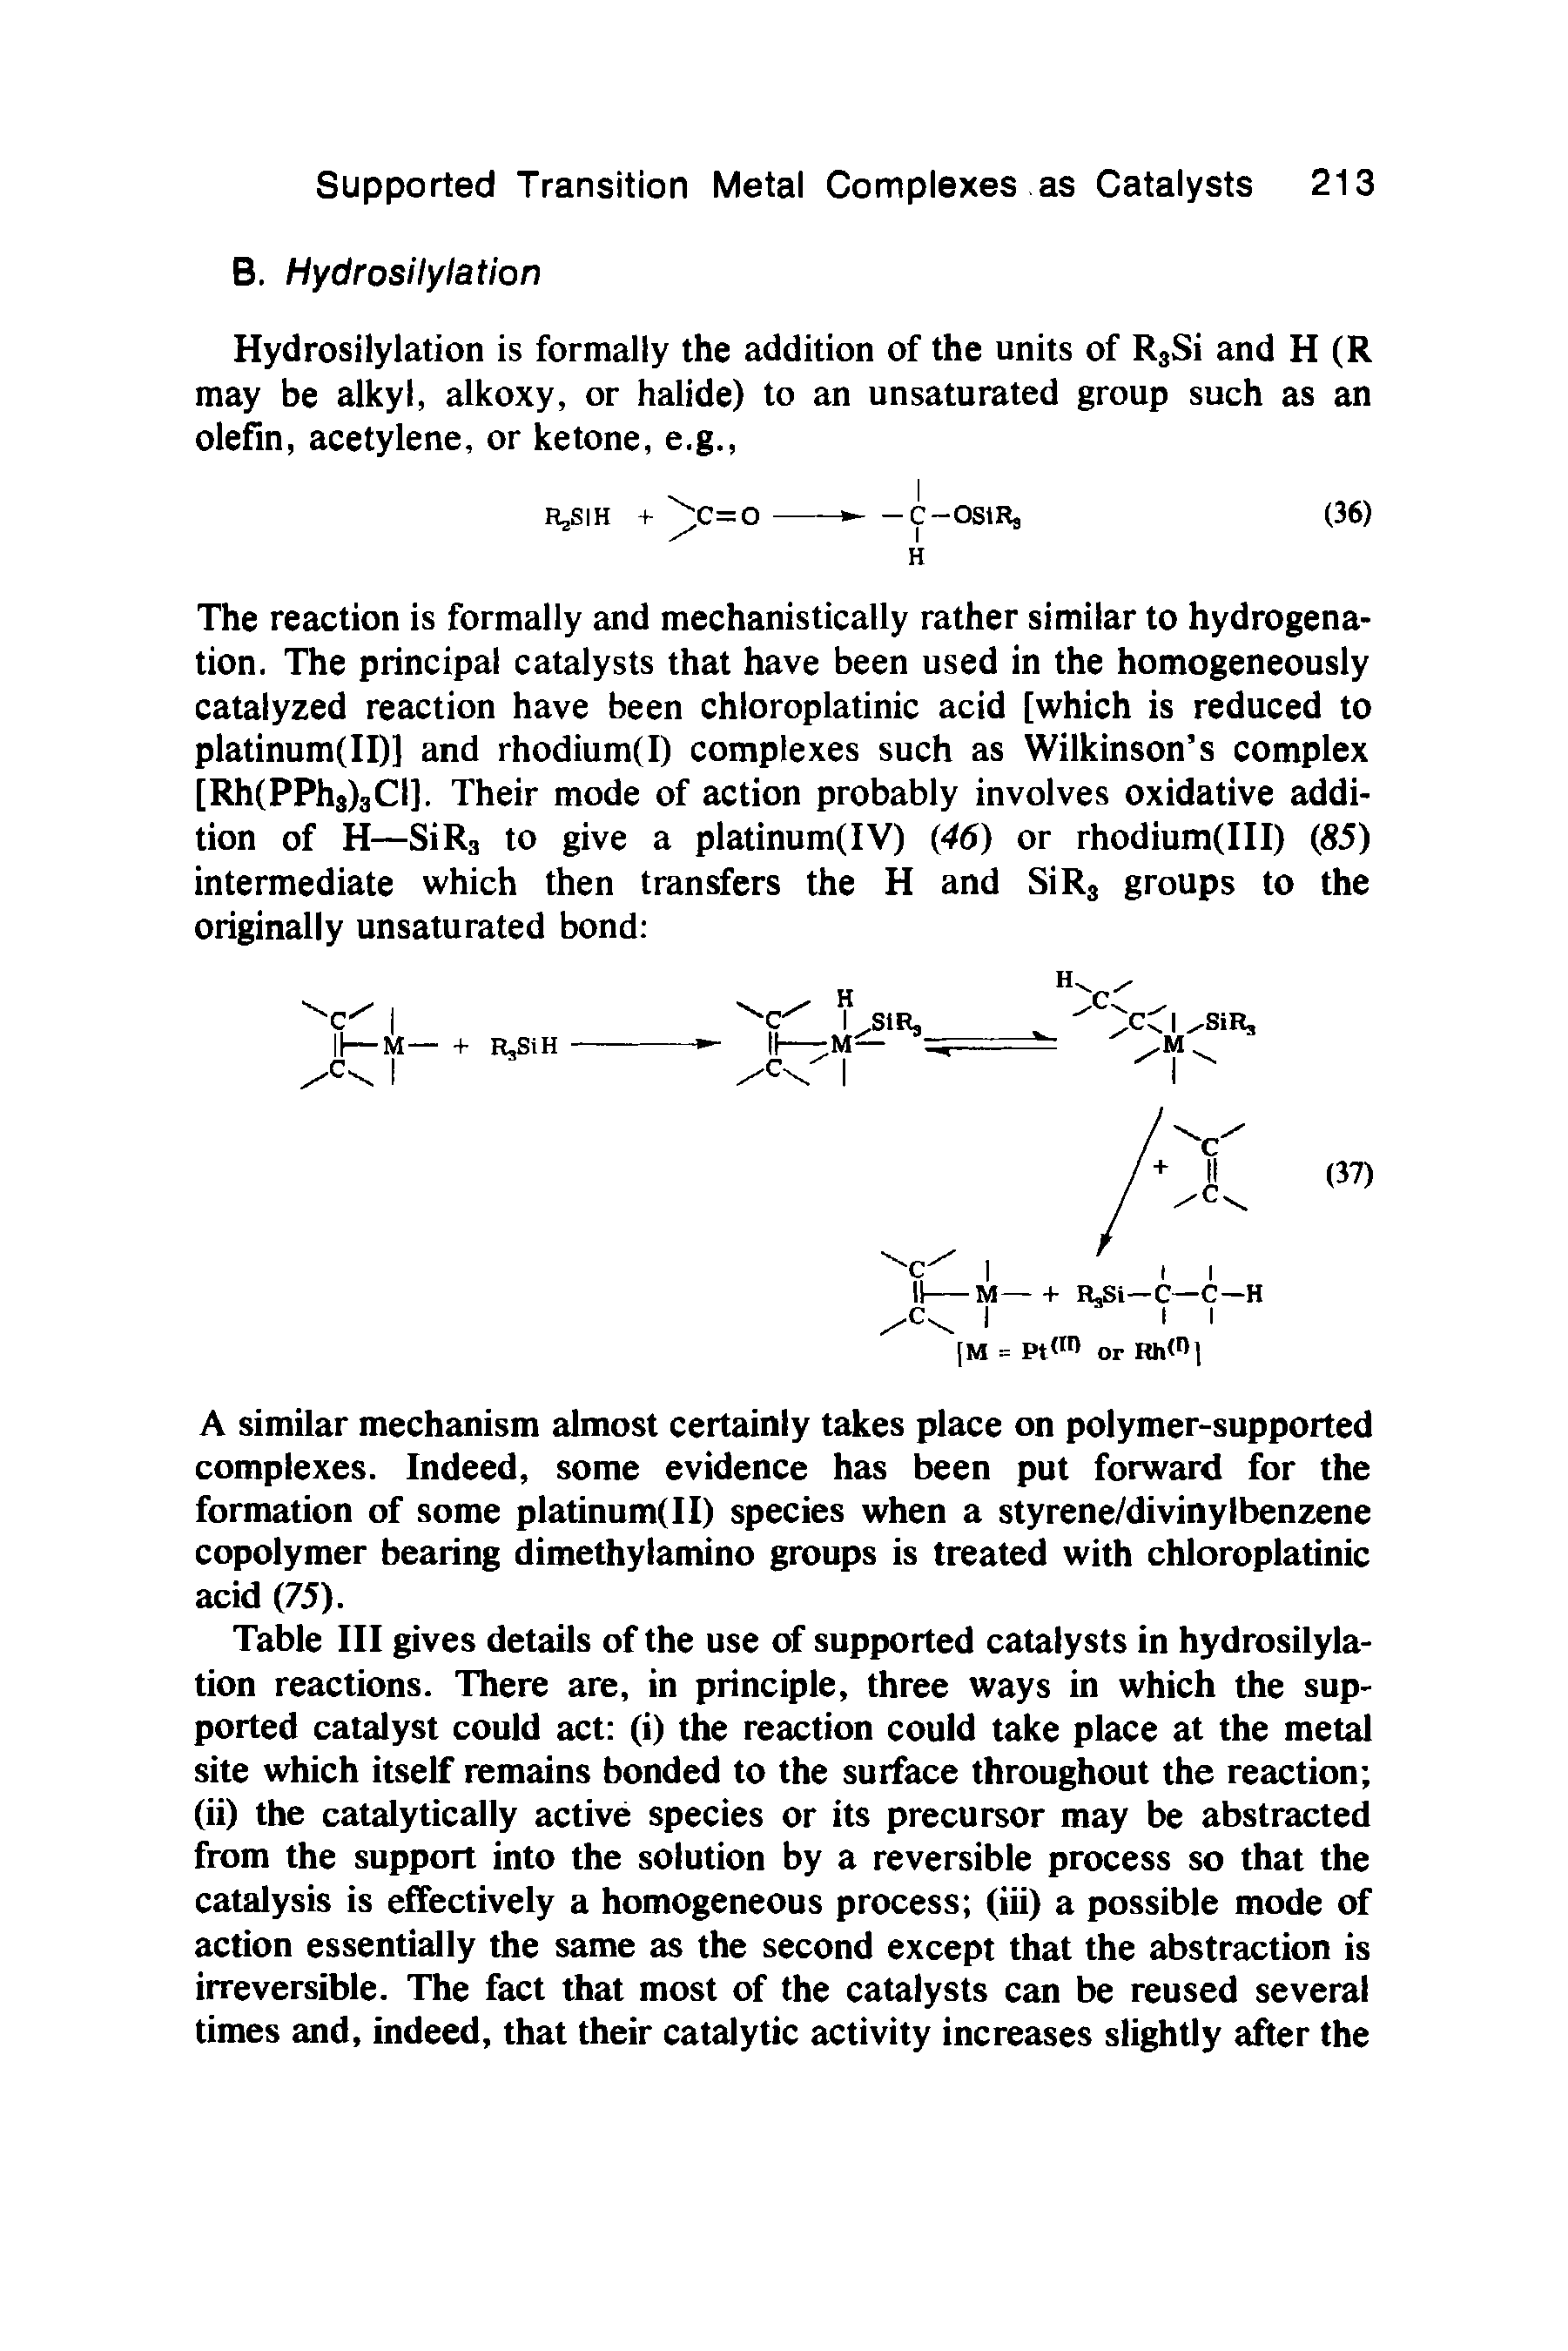 Table III gives details of the use of supported catalysts in hydrosilylation reactions. There are, in principle, three ways in which the supported catalyst could act (i) the reaction could take place at the metal site which itself remains bonded to the surface throughout the reaction (ii) the catalytically active species or its precursor may be abstracted from the support into the solution by a reversible process so that the catalysis is effectively a homogeneous process (iii) a possible mode of action essentially the same as the second except that the abstraction is irreversible. The fact that most of the catalysts can be reused several times and, indeed, that their catalytic activity increases slightly after the...